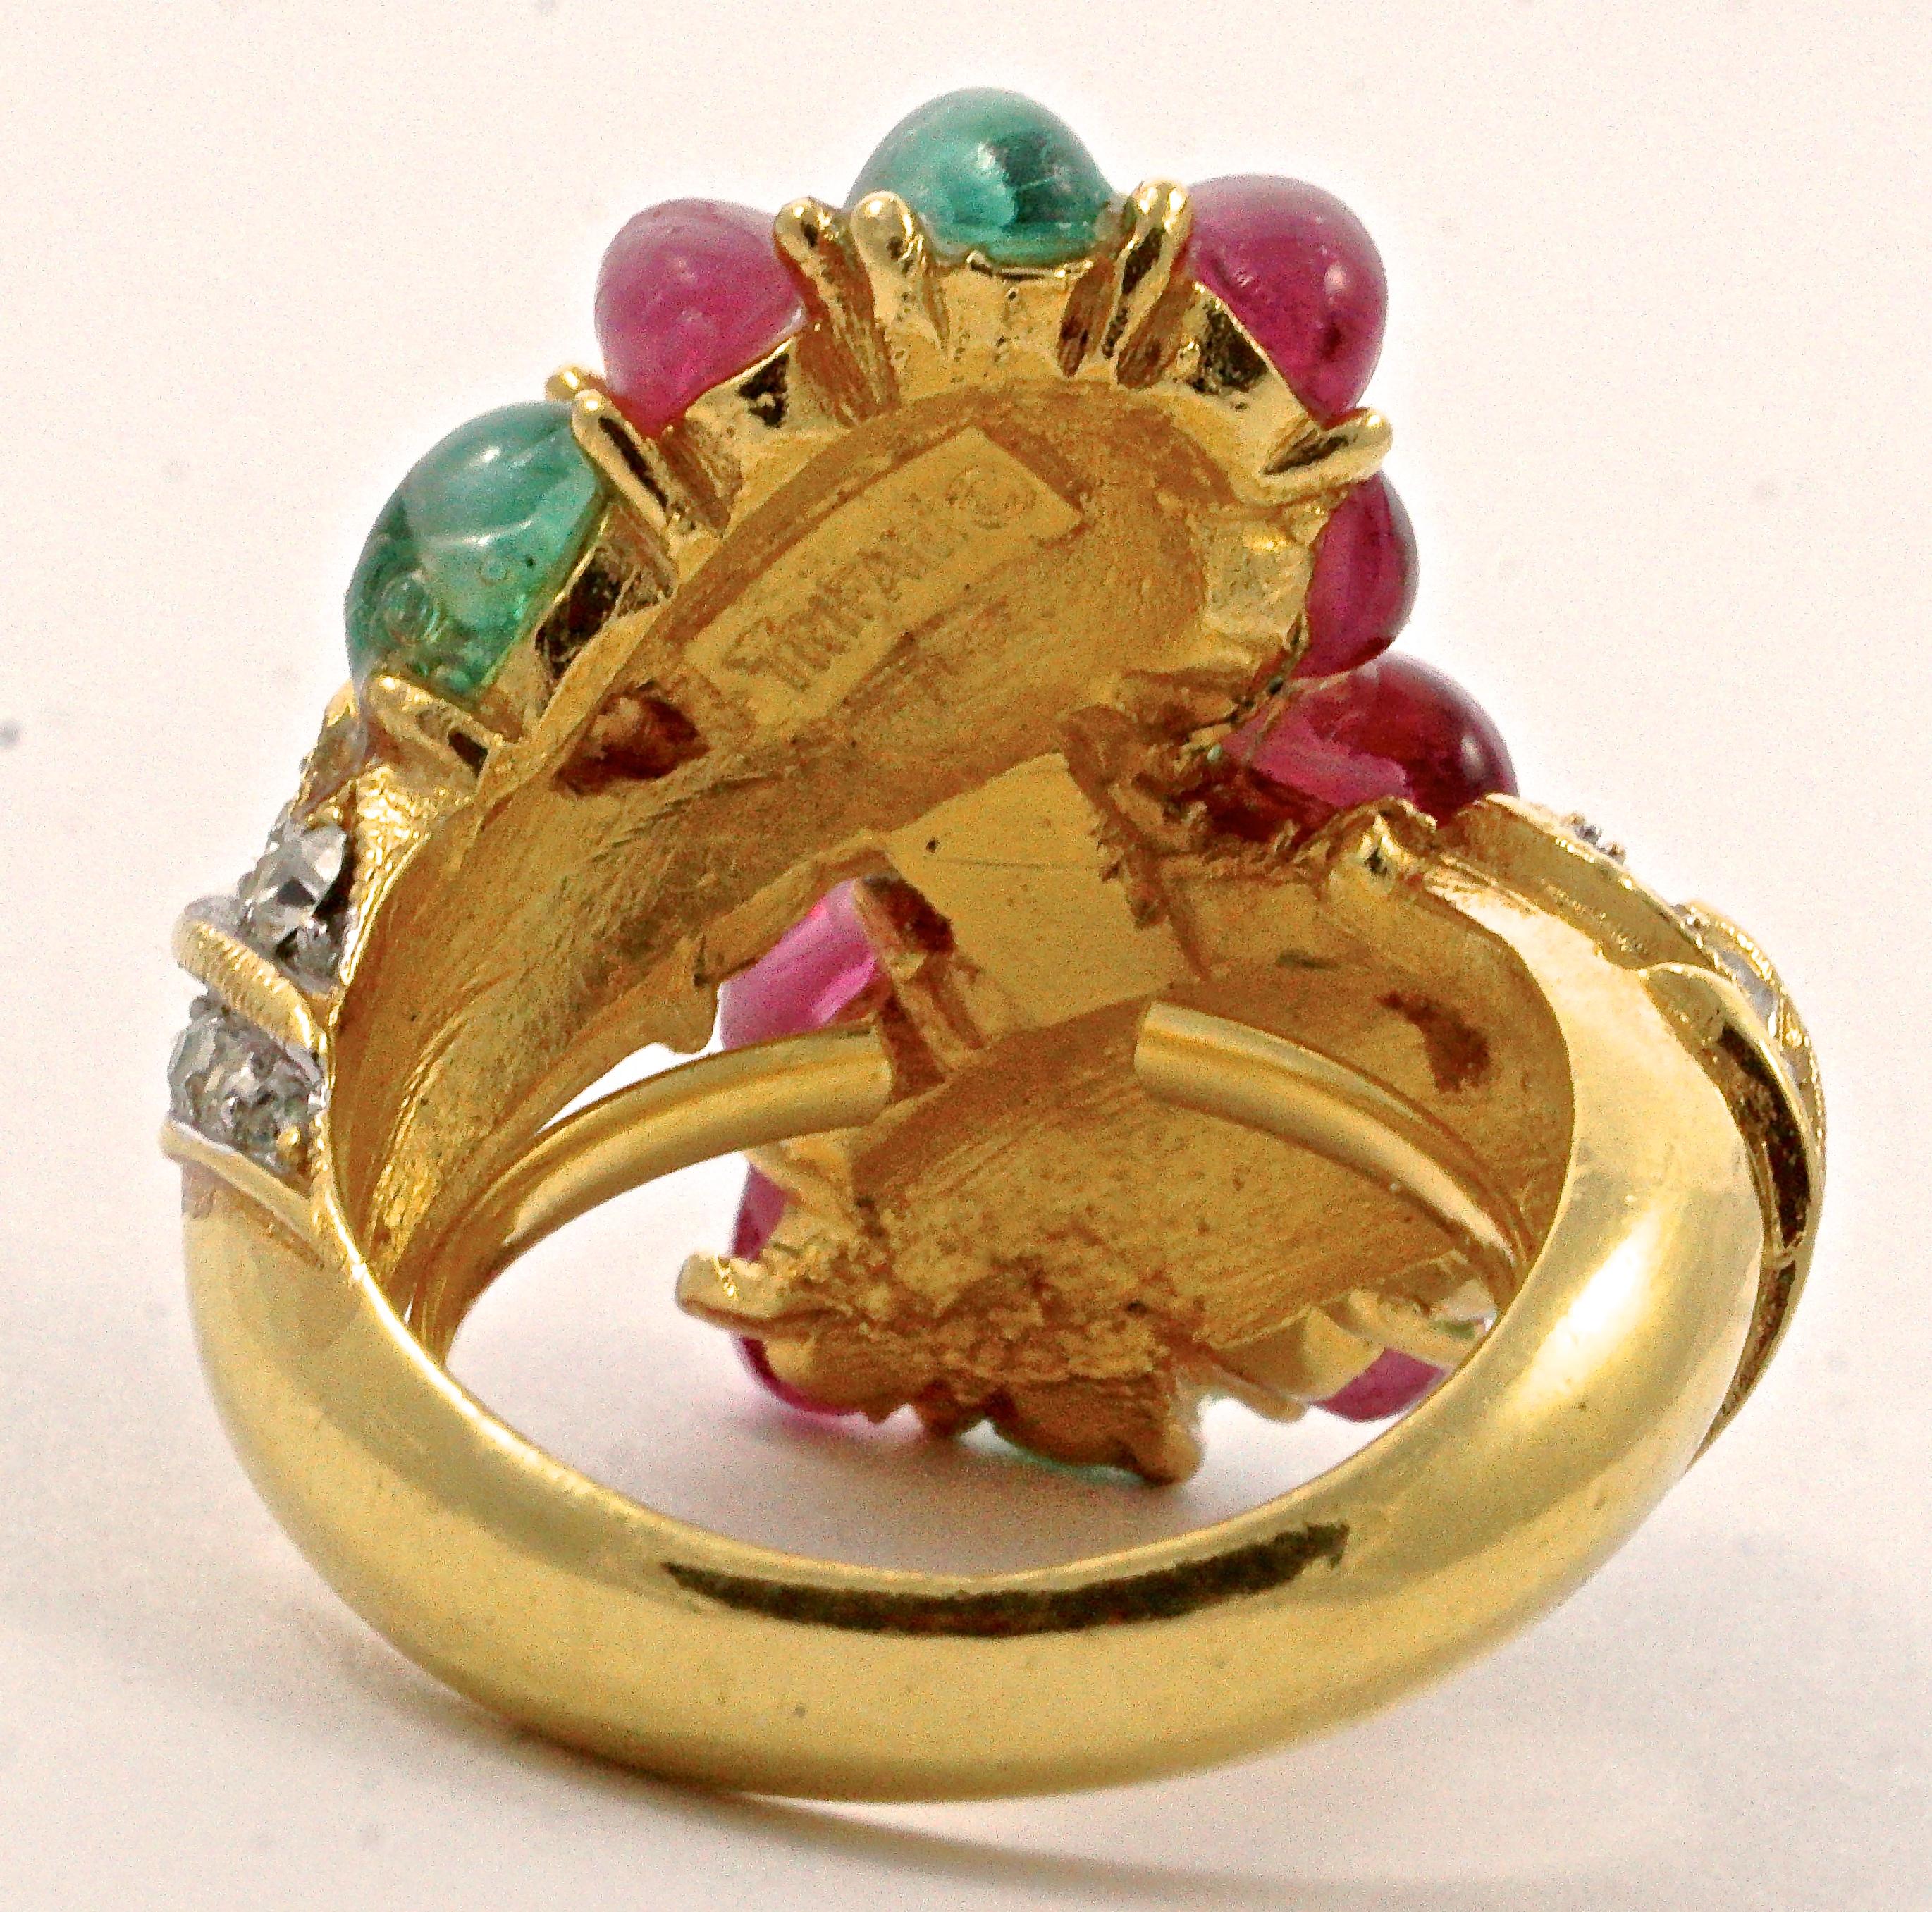 Beautiful Trifari gold plated ring, featuring clusters of dark pink and green oval glass cabochons with white swirls, and embellished on the shoulders with clear rhinestones. Ring size UK L 1/2, US 5 7/8, inside diameter 1.7cm / .67 inch, and the